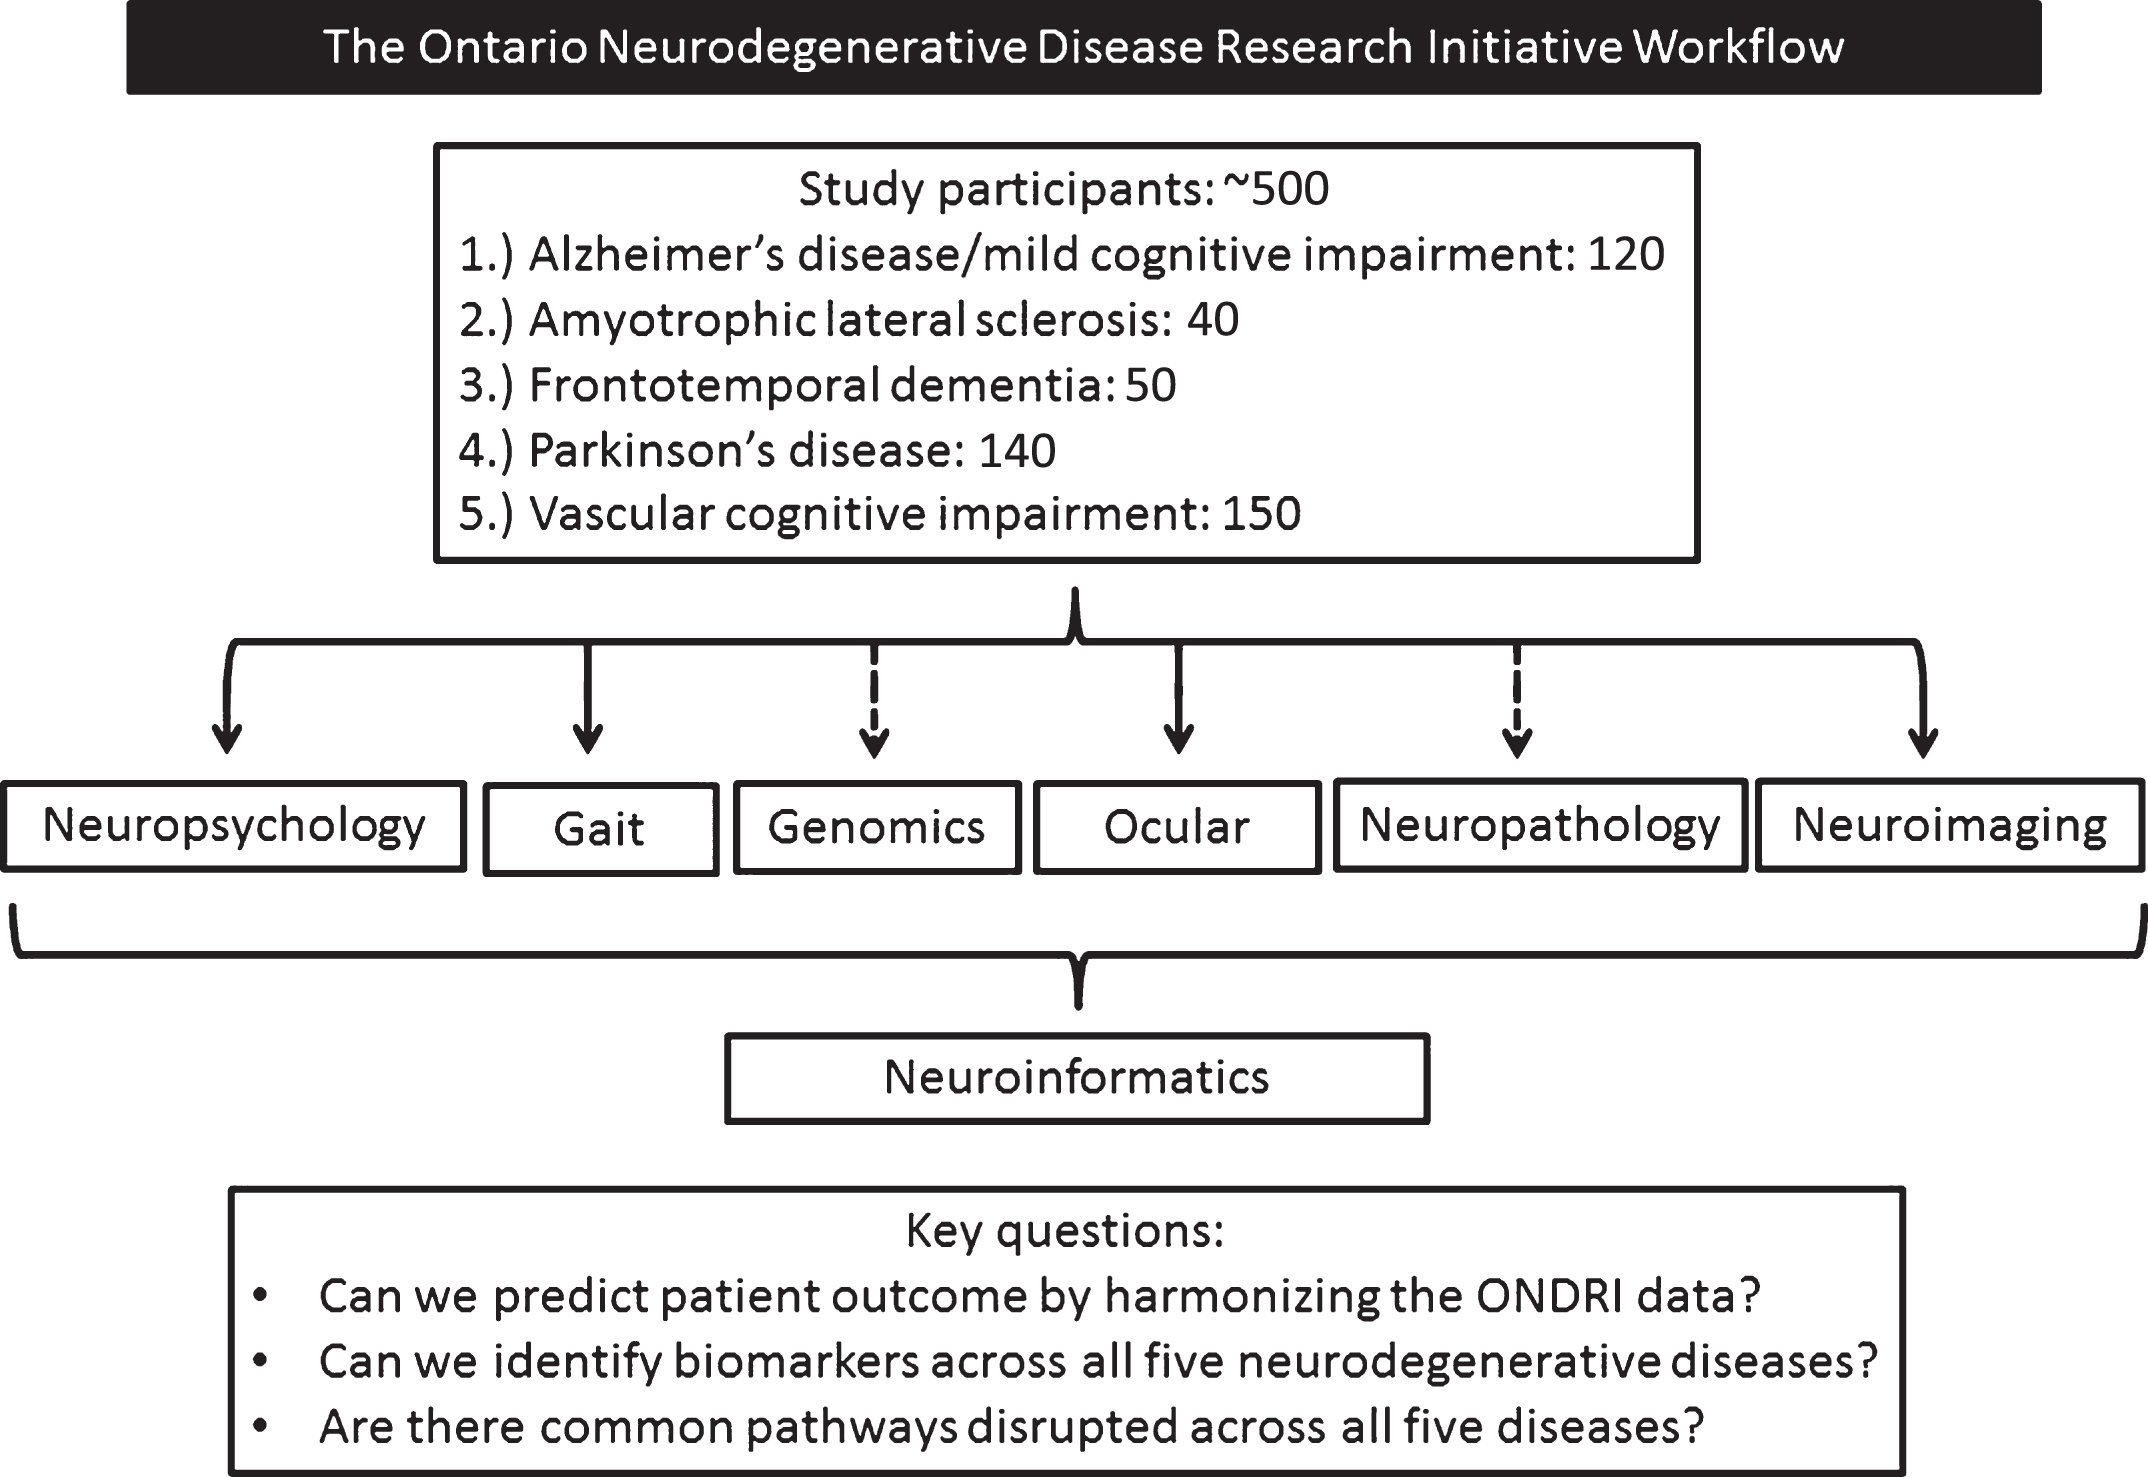 The Ontario Neurodegenerative Disease Research Initiative workflow. Dashed arrows represent single time assessments.